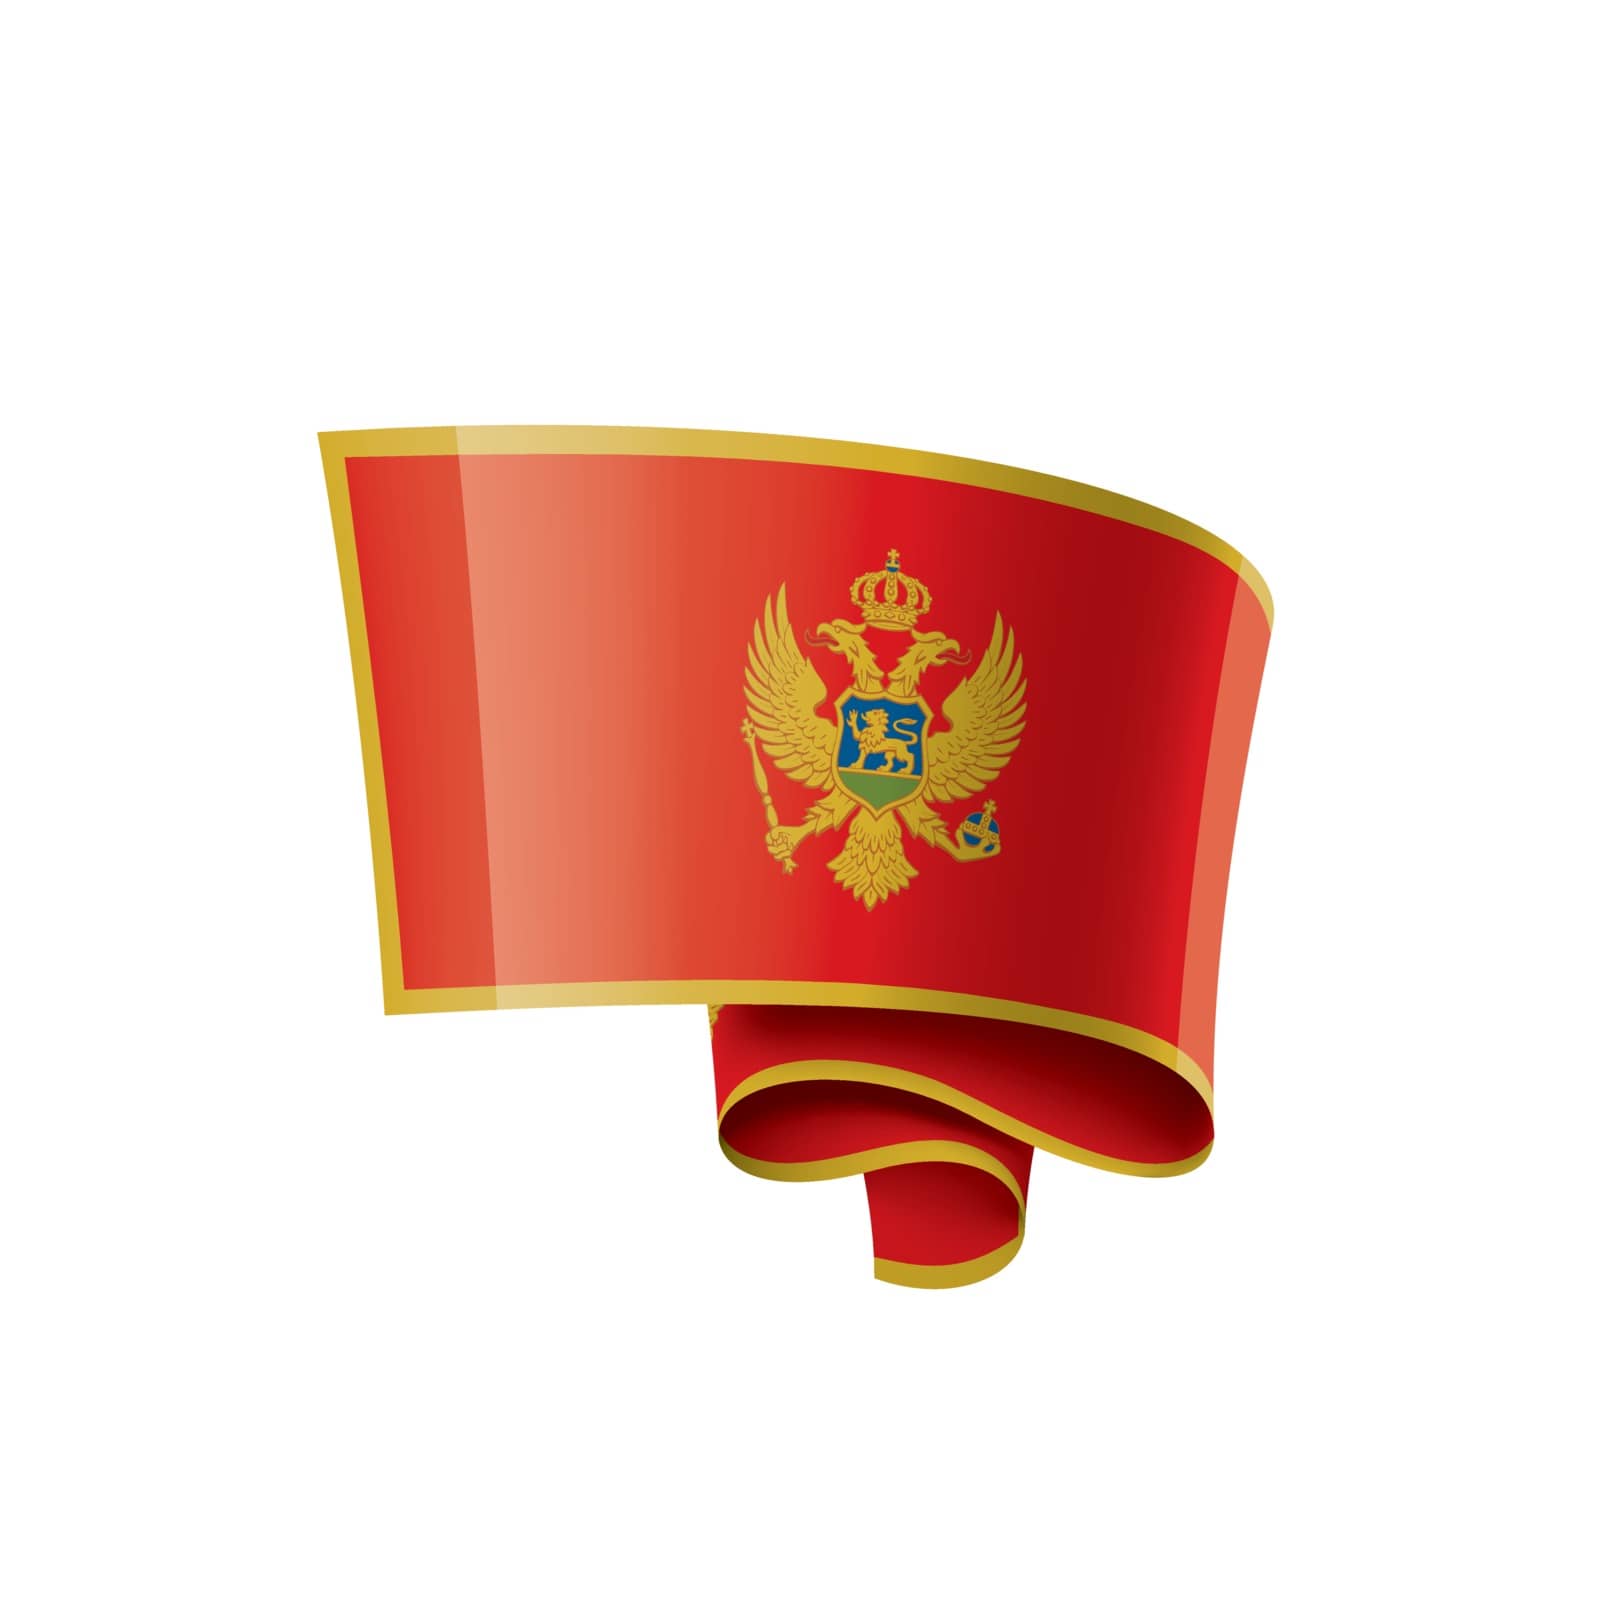 montenegro flag, vector illustration on a white background by butenkow